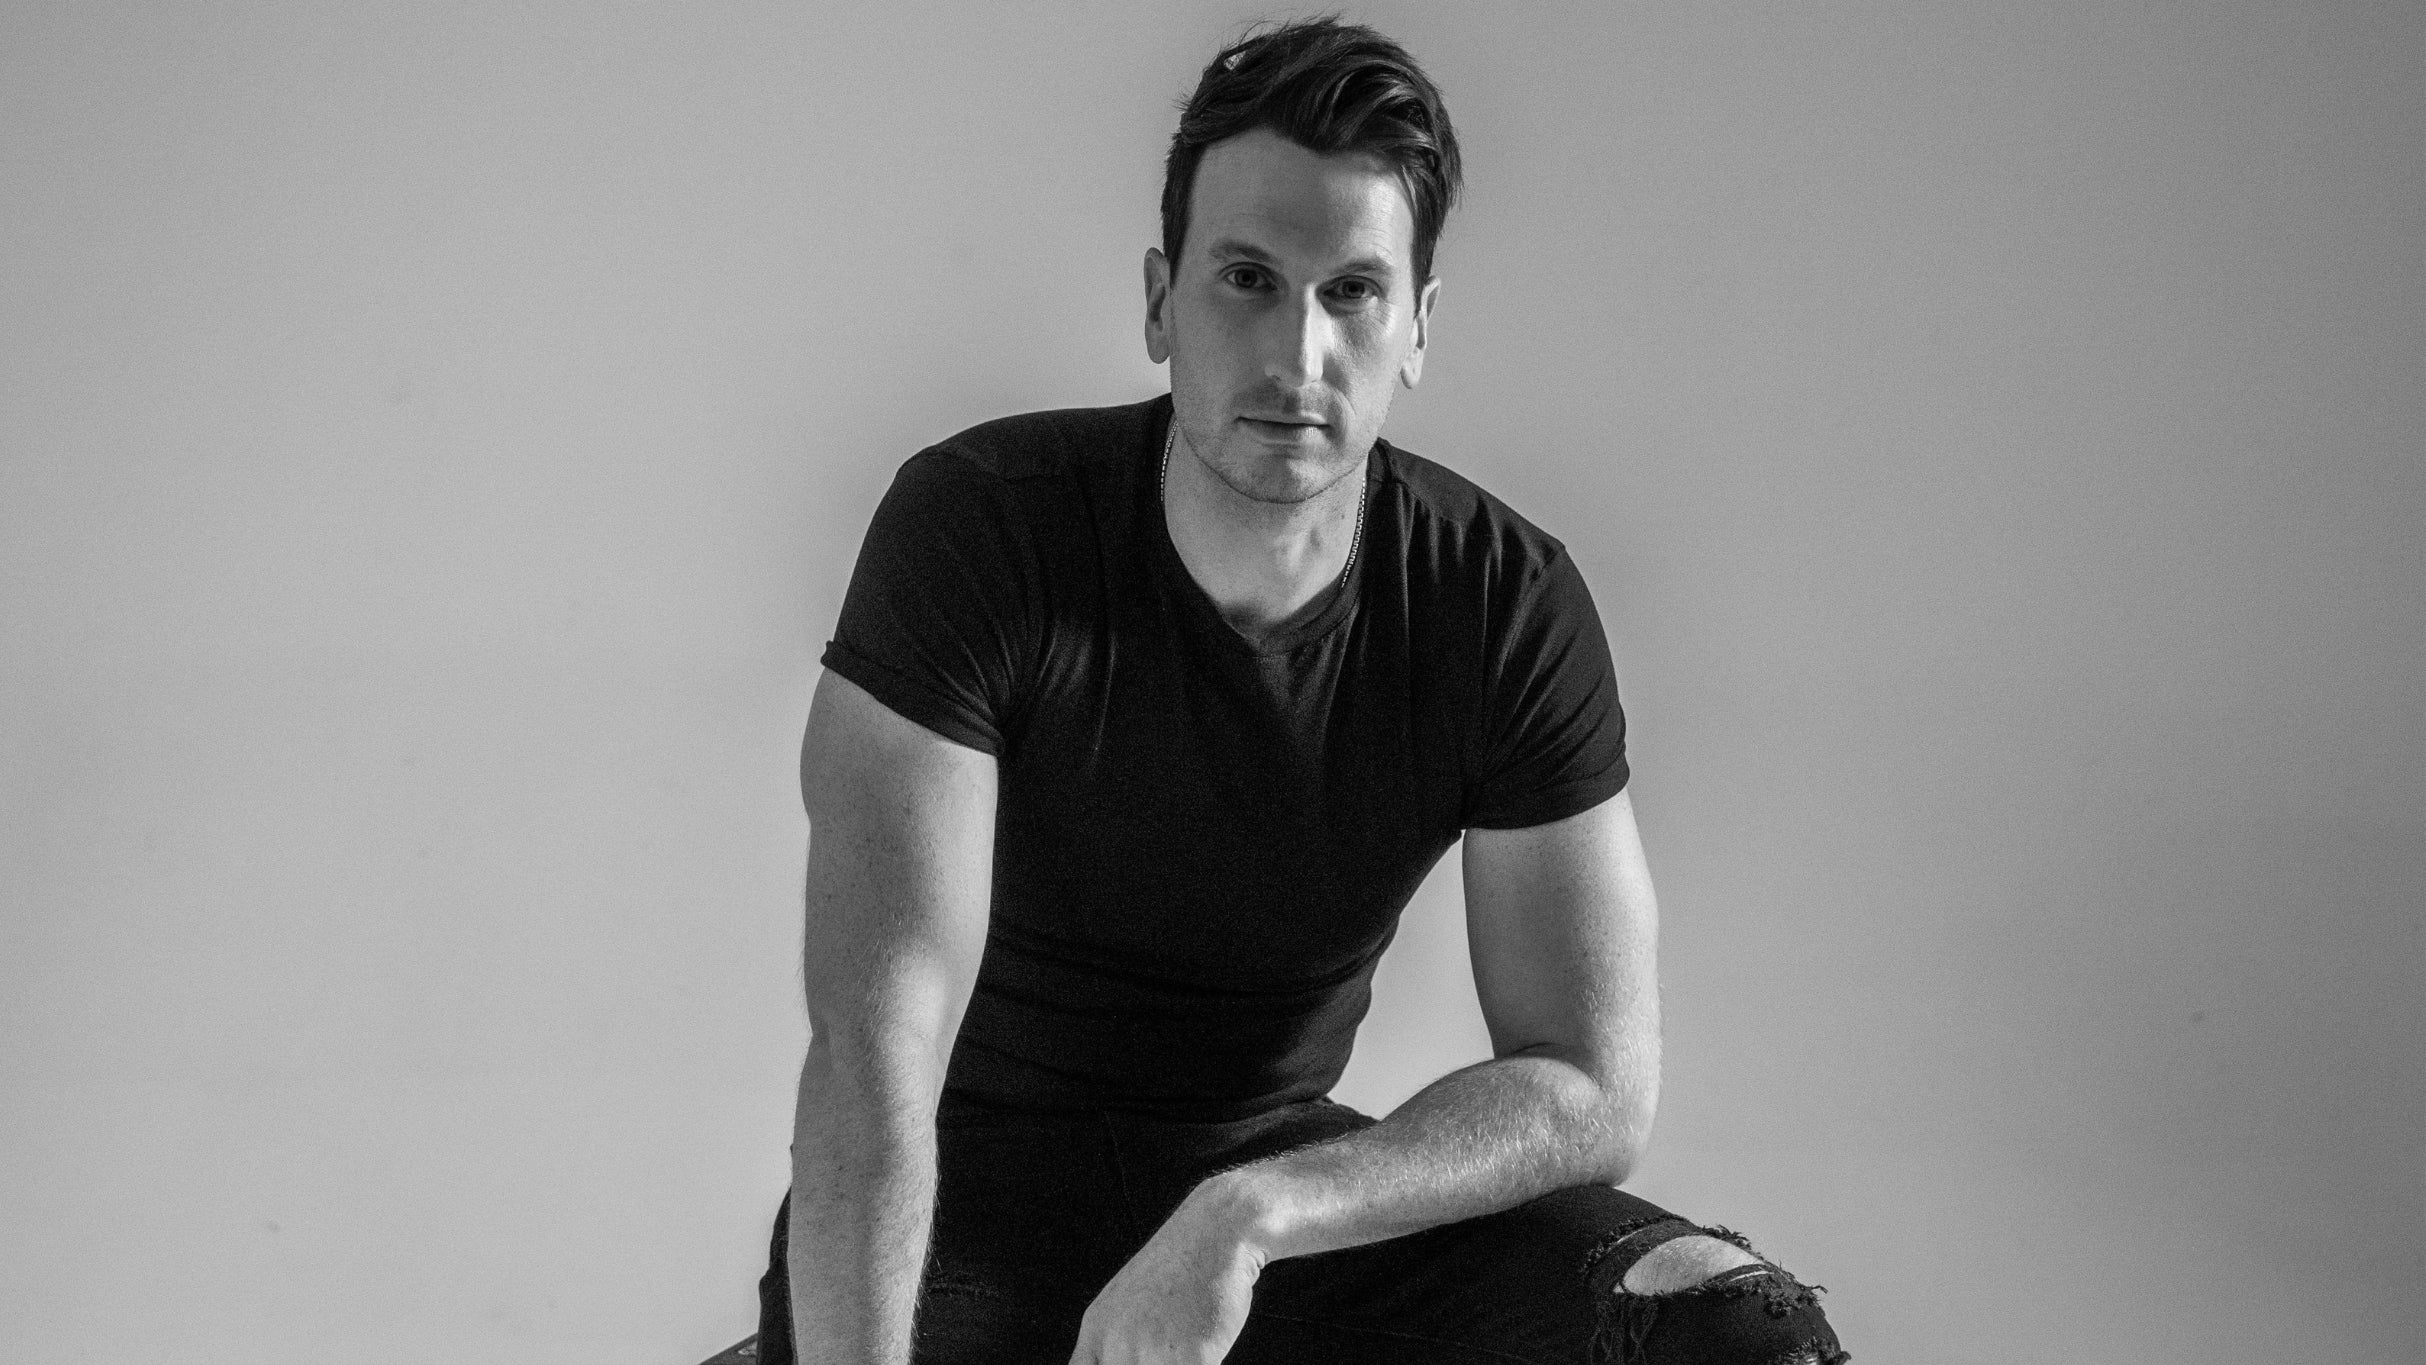 Russell Dickerson & Tyler Hubbard free presale info for event tickets in Camdenton, MO (Ozarks Amphitheater)